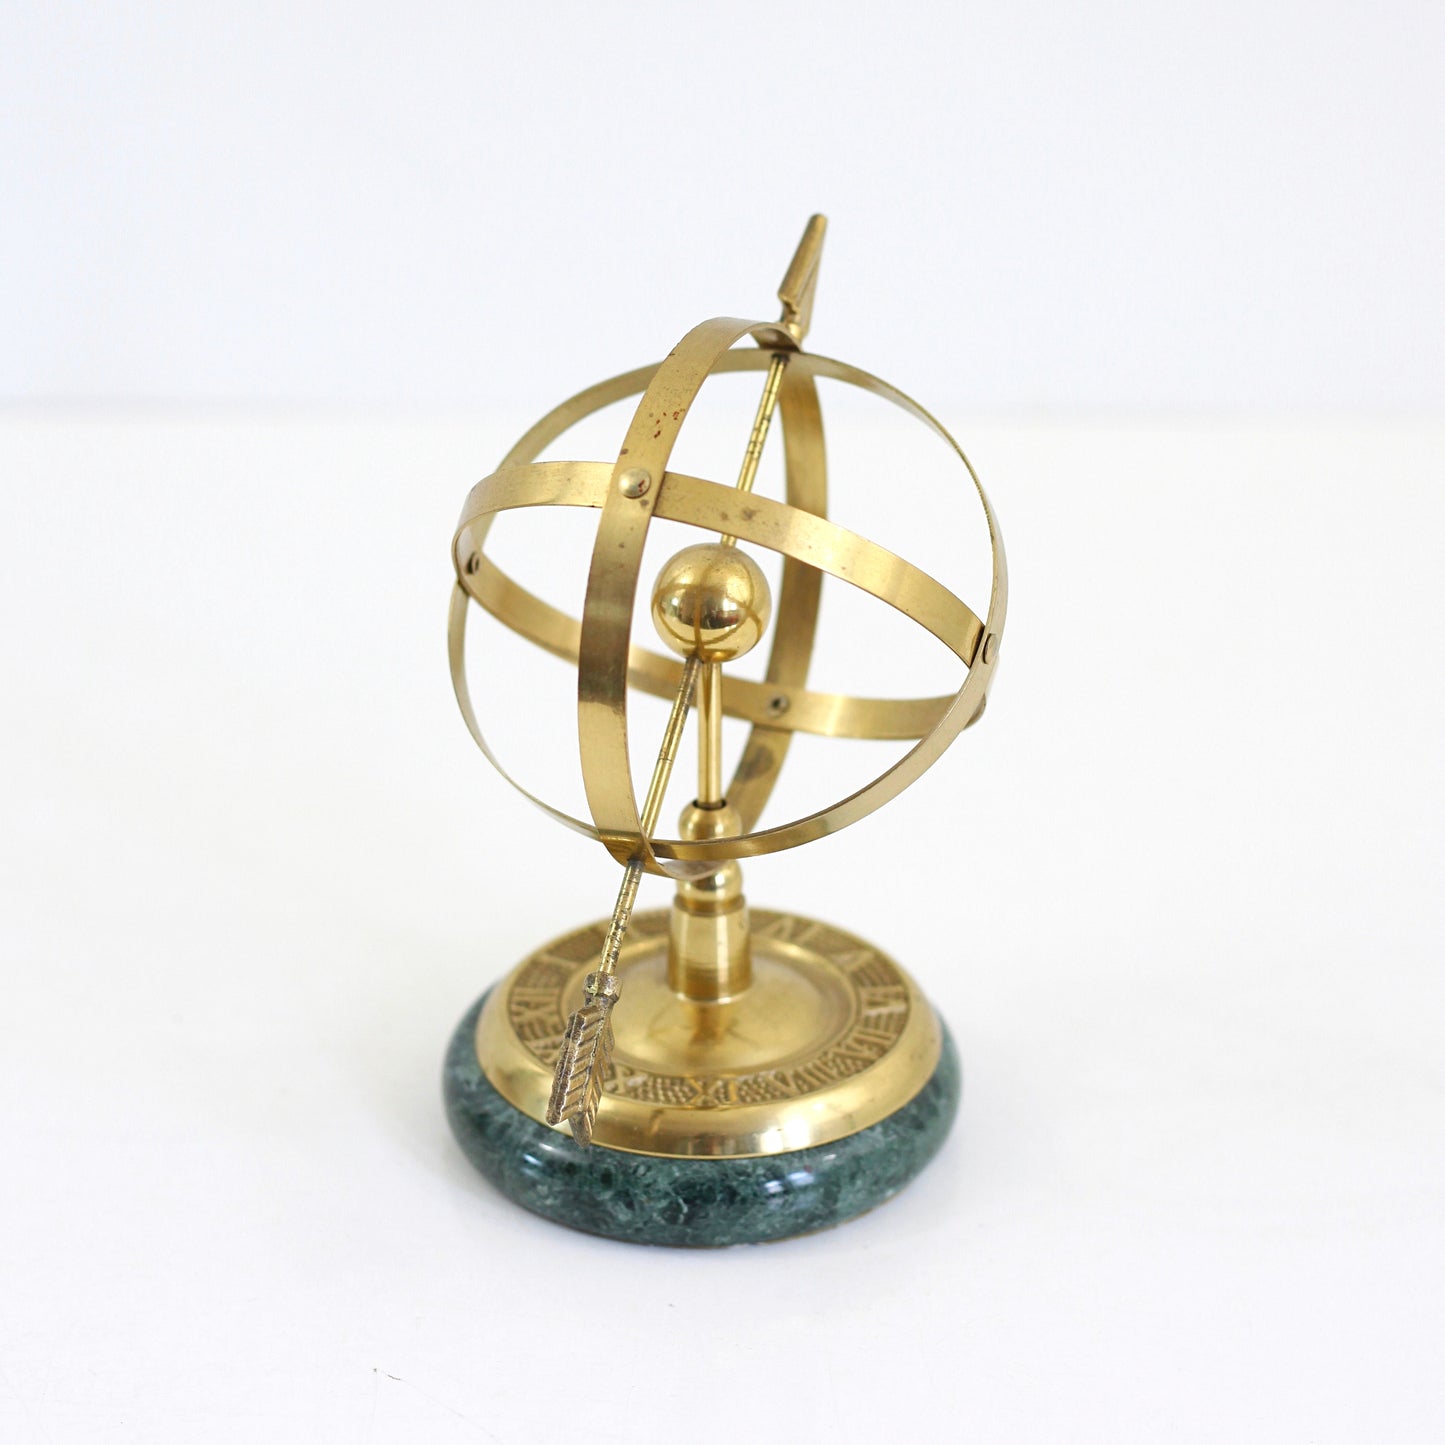 SOLD - Vintage Brass & Marble Armillary Sphere